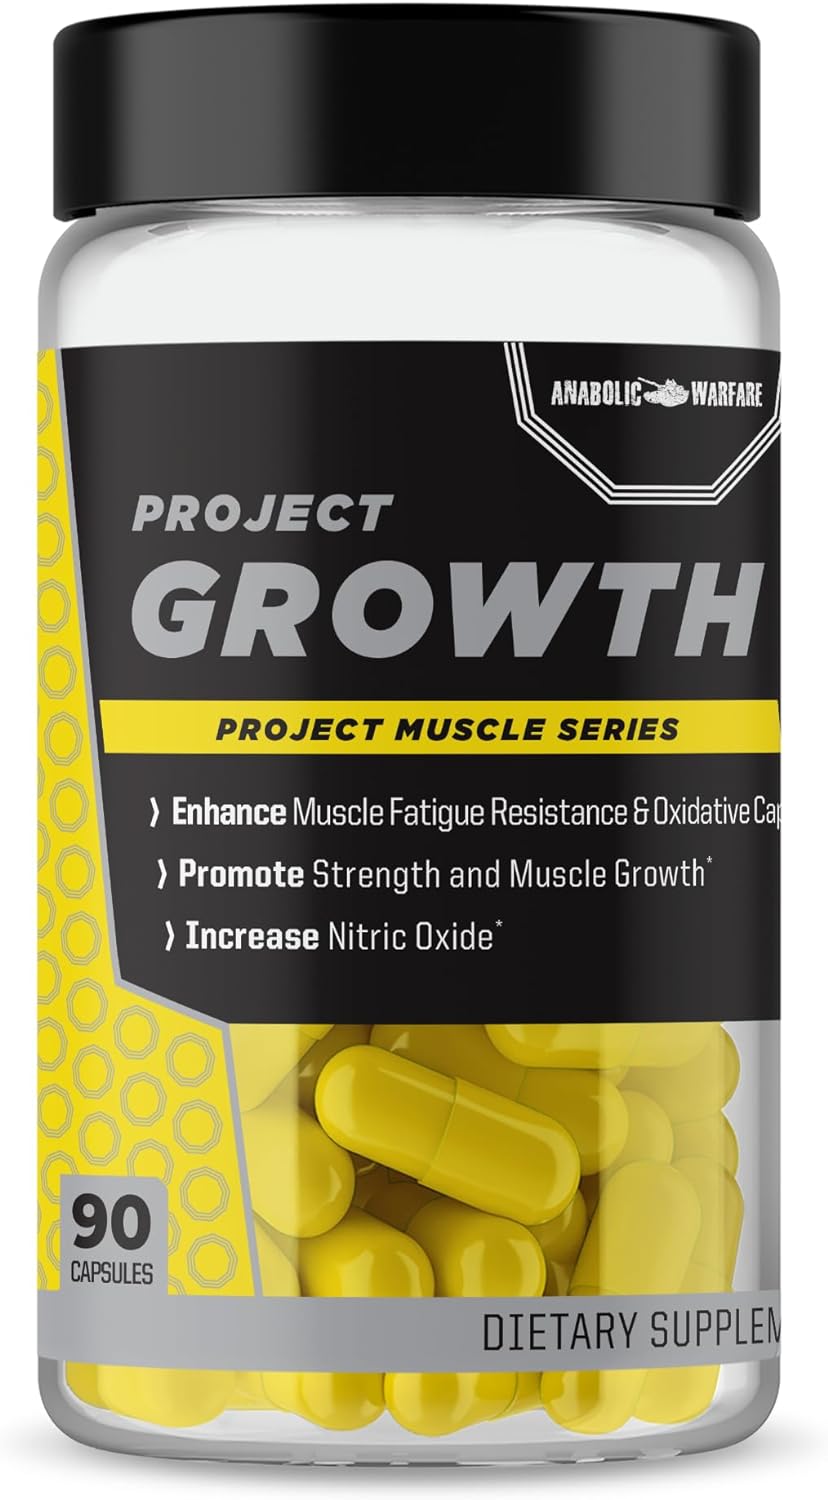 Anabolic Warfare Project Growth, Strength, Supports Muscle Growth, Promotes Recovery, Increase Nitric Oxide, Made with Botanicals* (90 Capsules)